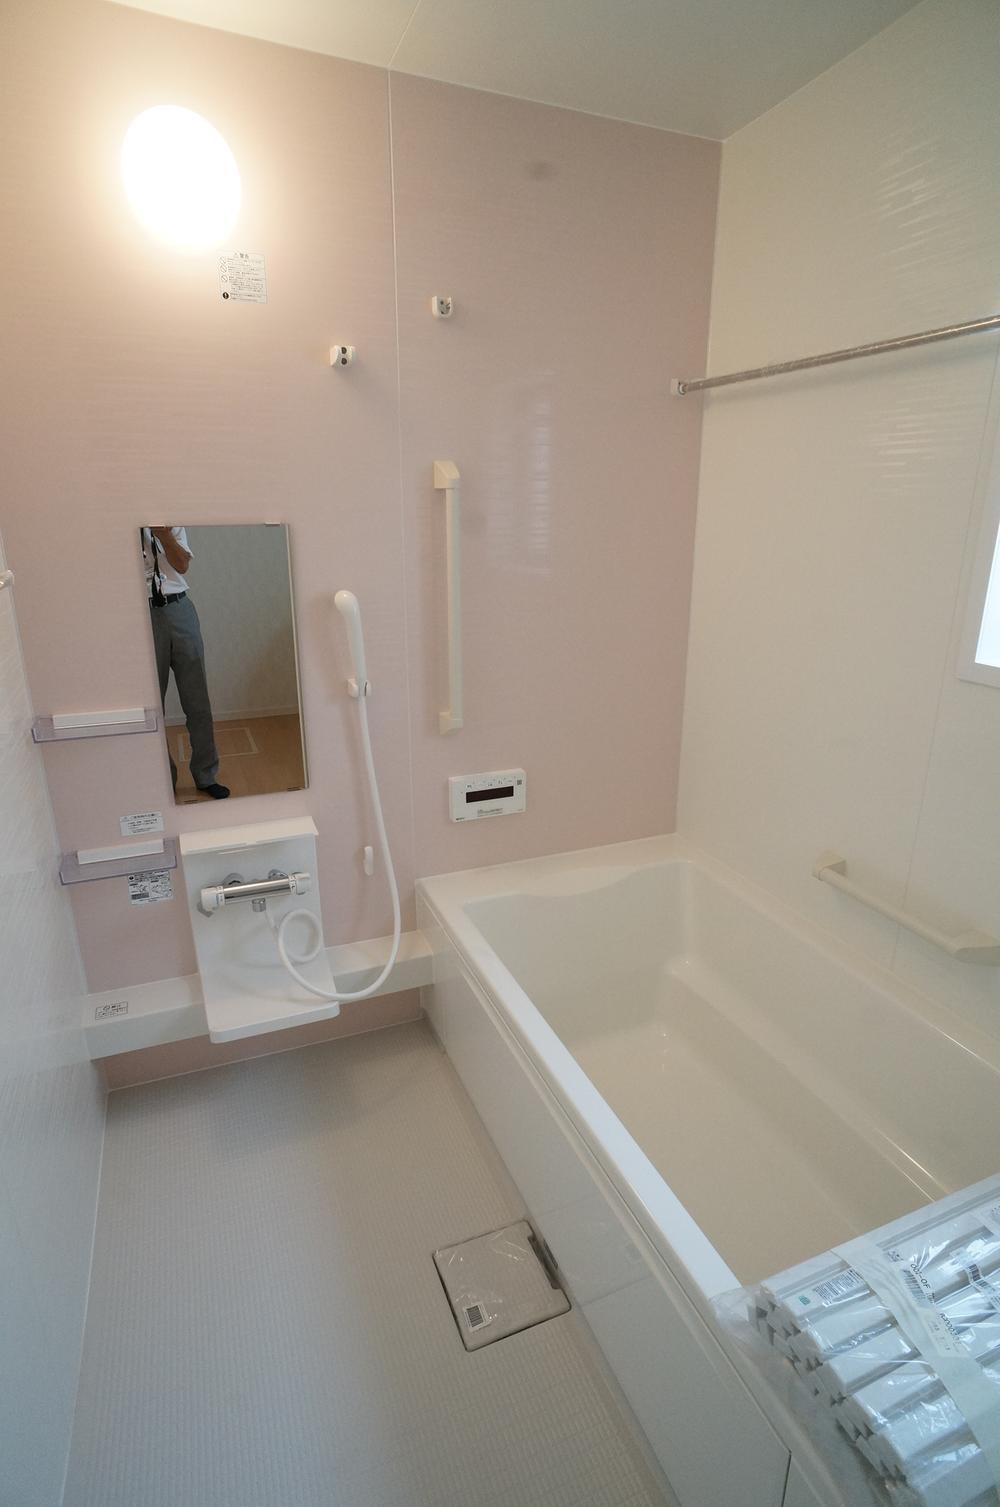 Same specifications photo (bathroom). It is the example of construction of the same construction company. 